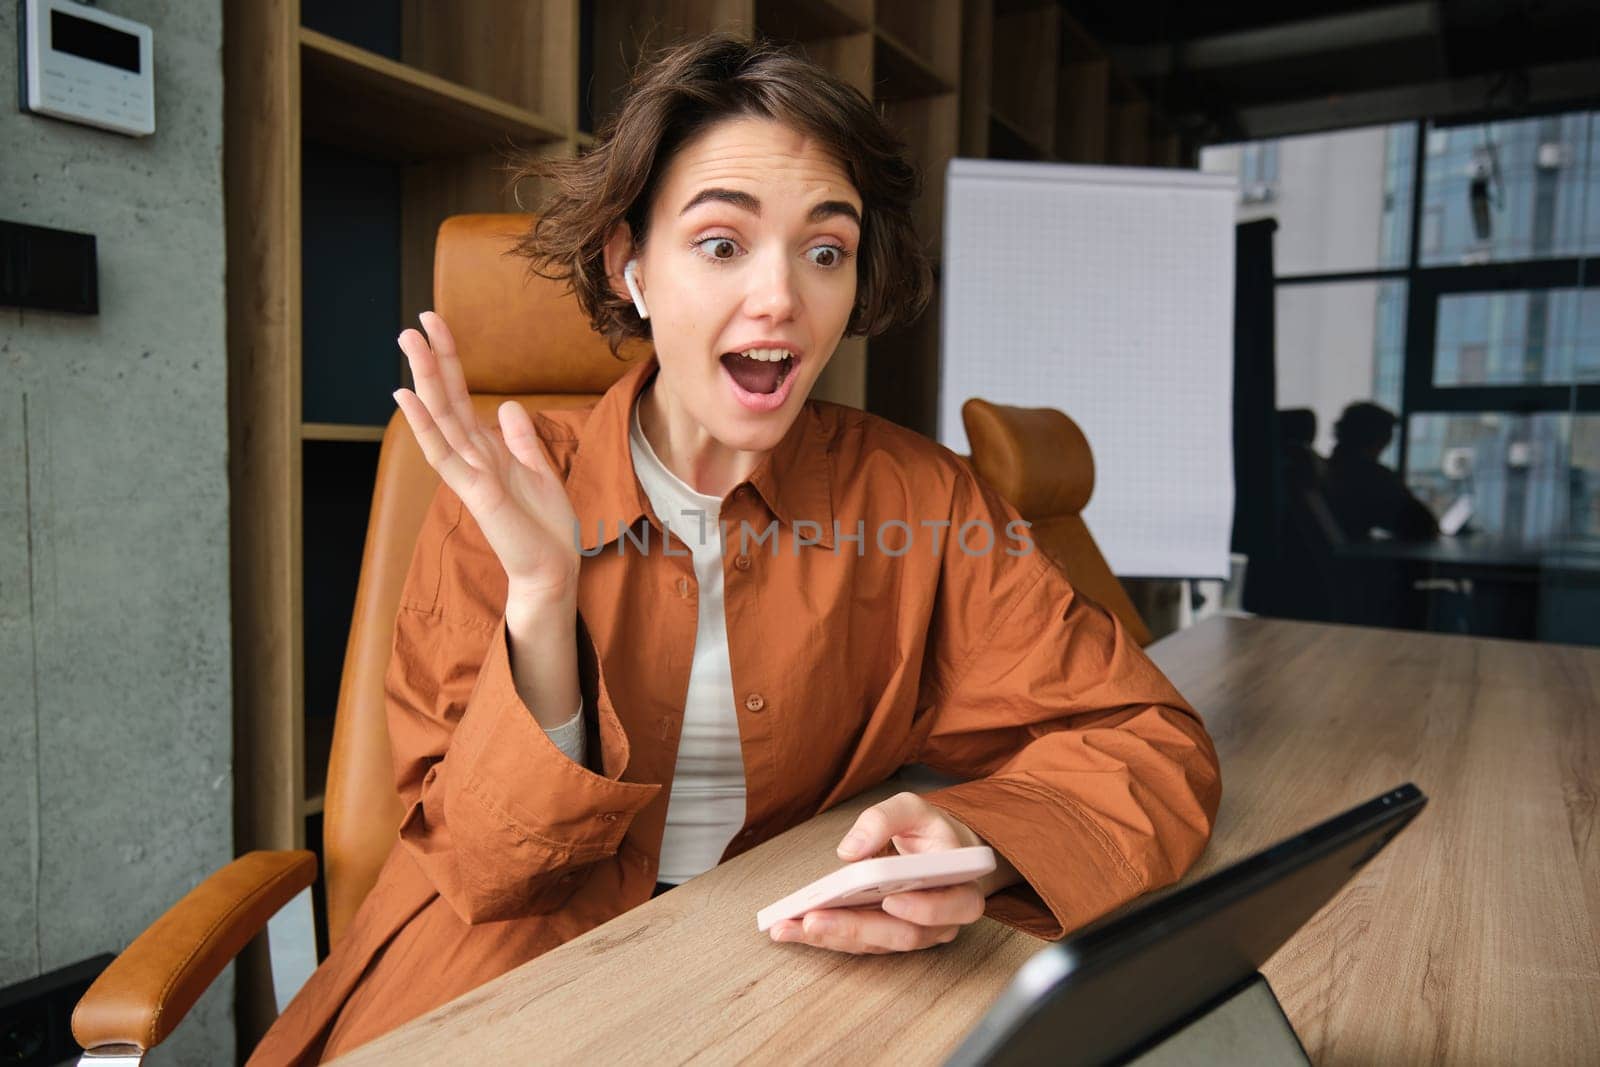 Portrait of excited young businesswoman, female entrepreneur in office, looking amazed, read great news on social media, holding smartphone and using digital tablet, enthusiastic reaction.